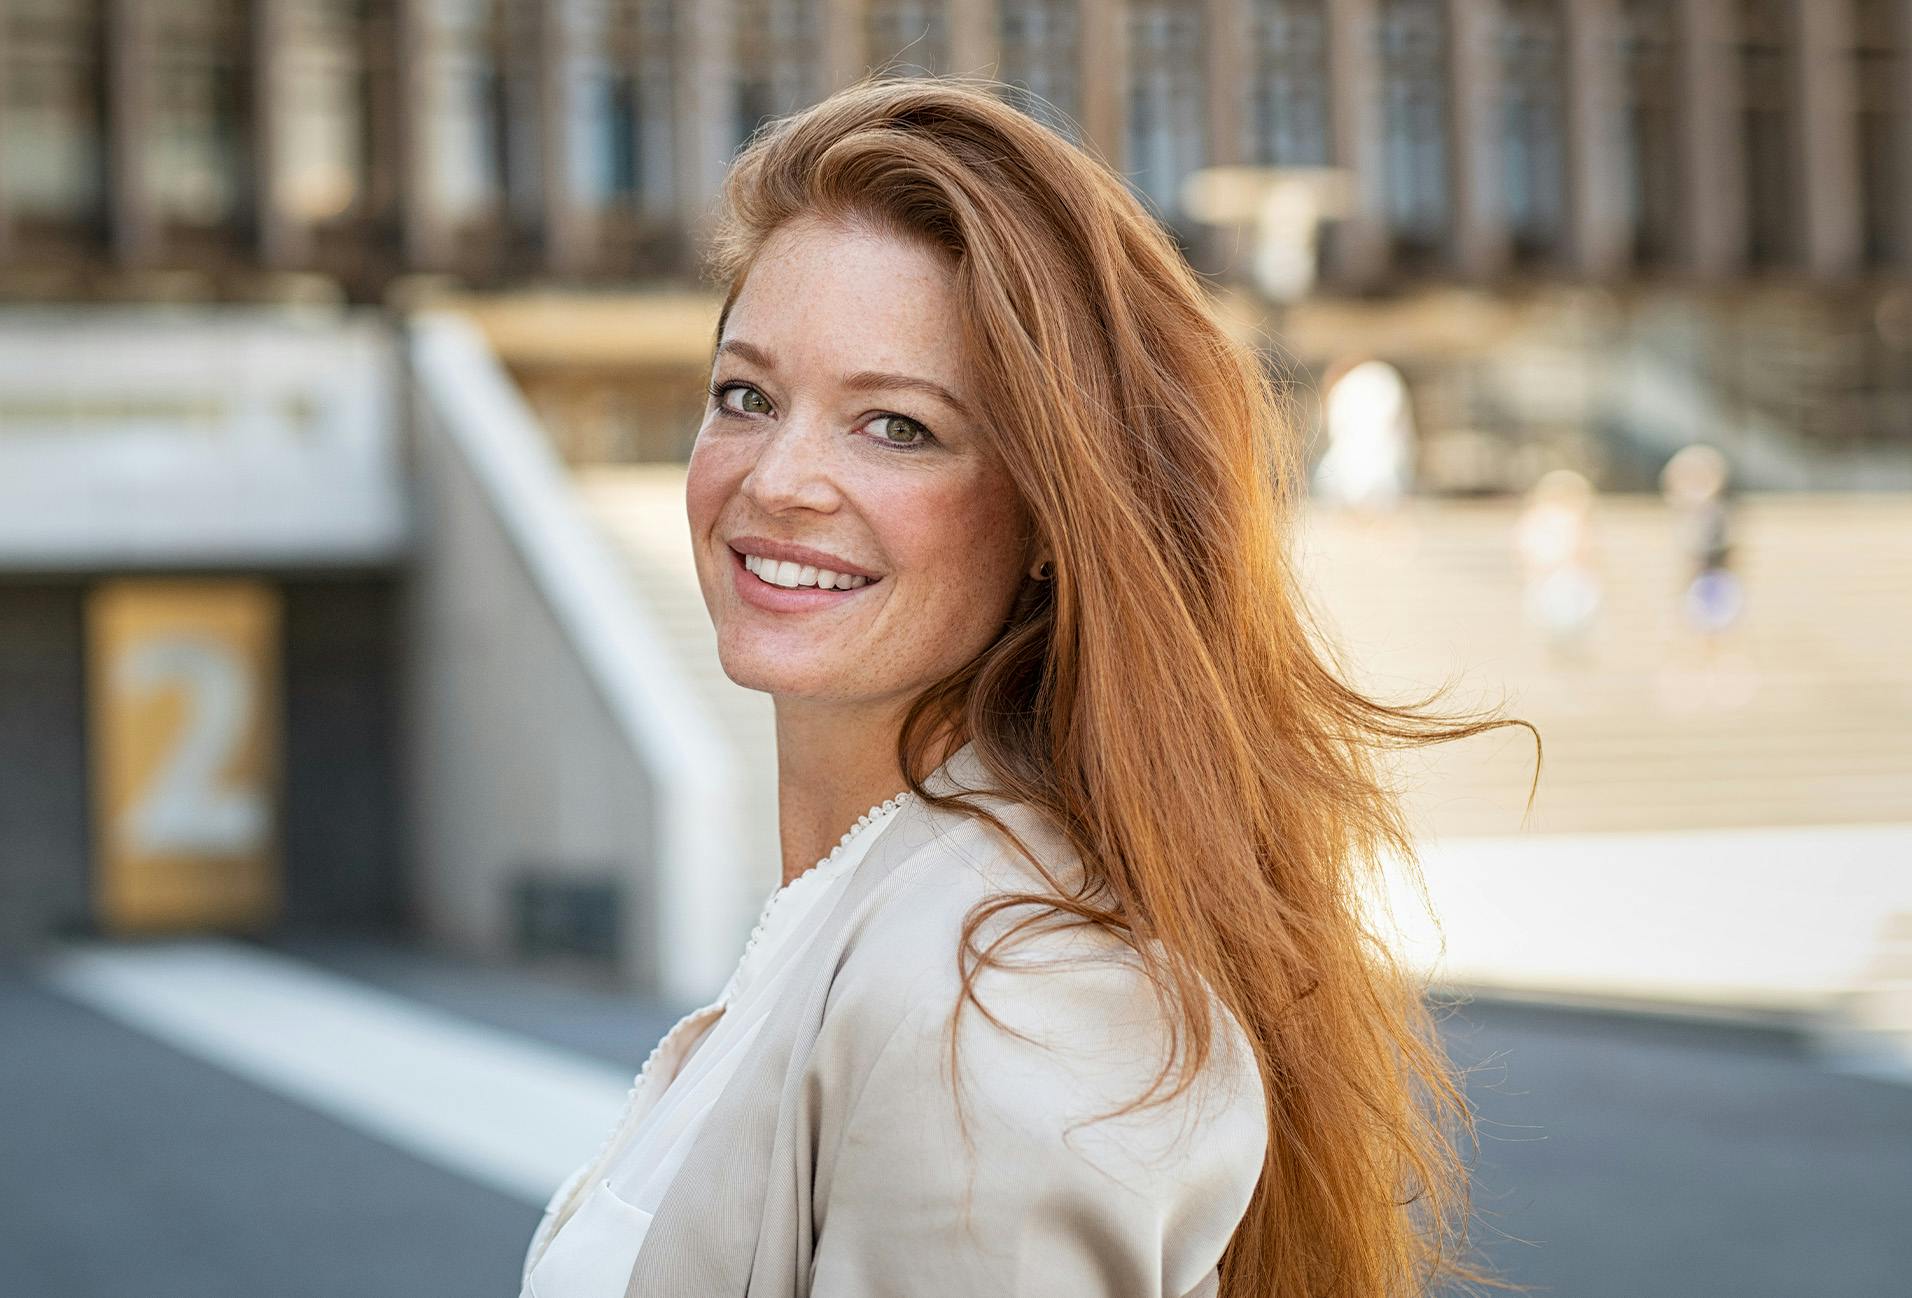 smiling woman with long red hair in a city setting